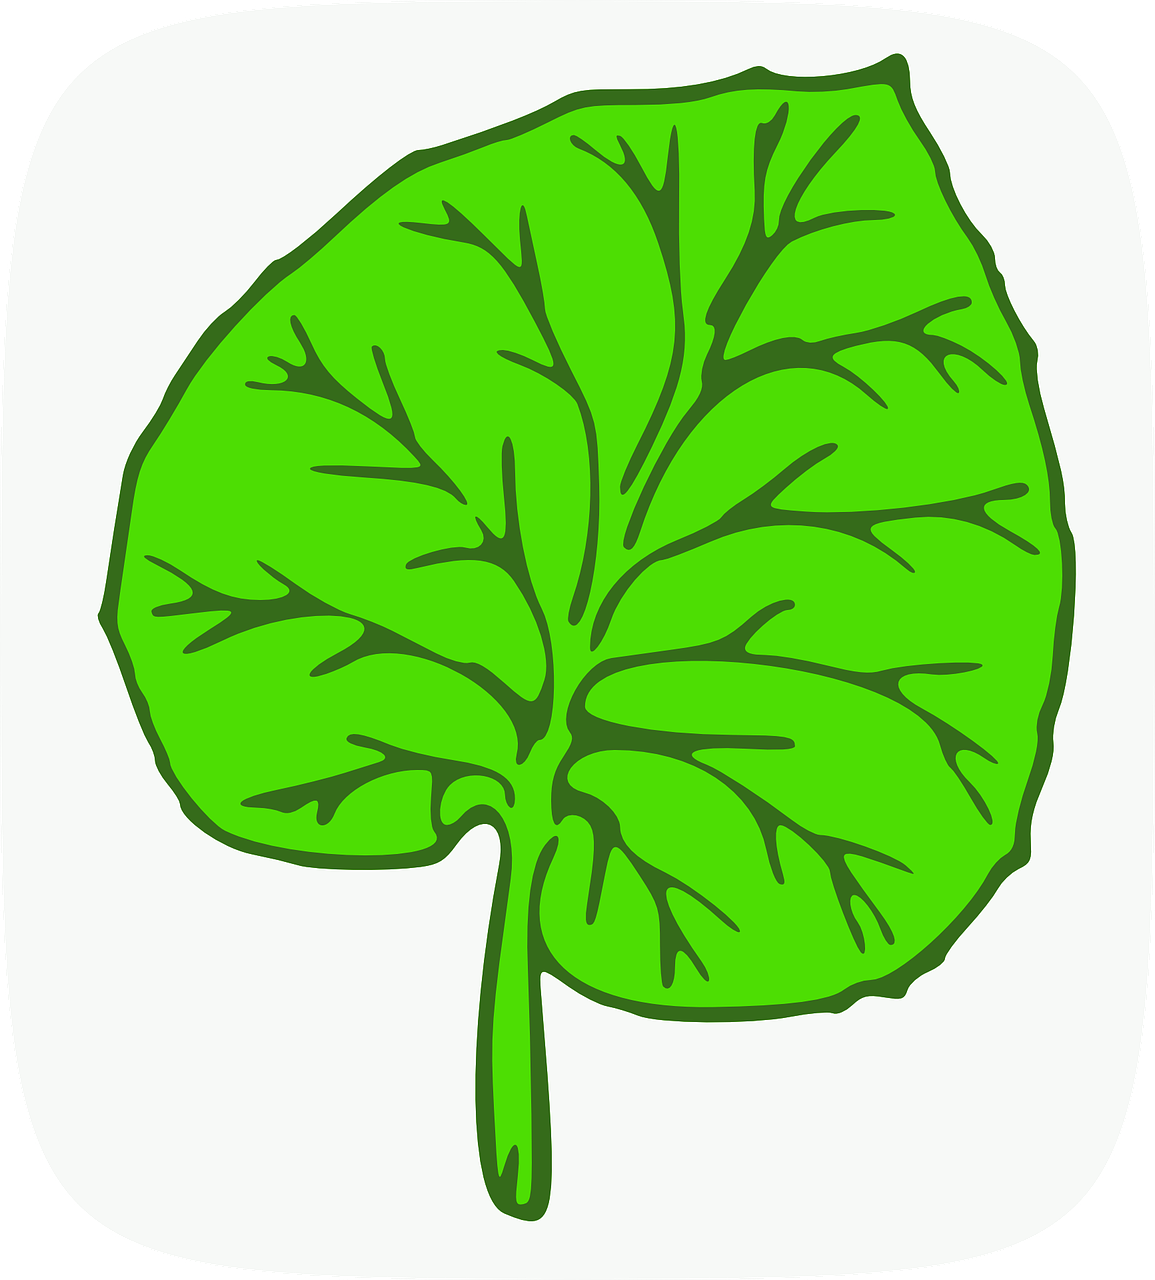 How to draw a leaf 19 ideas beautiful drawings of leaves HOWTODRAW